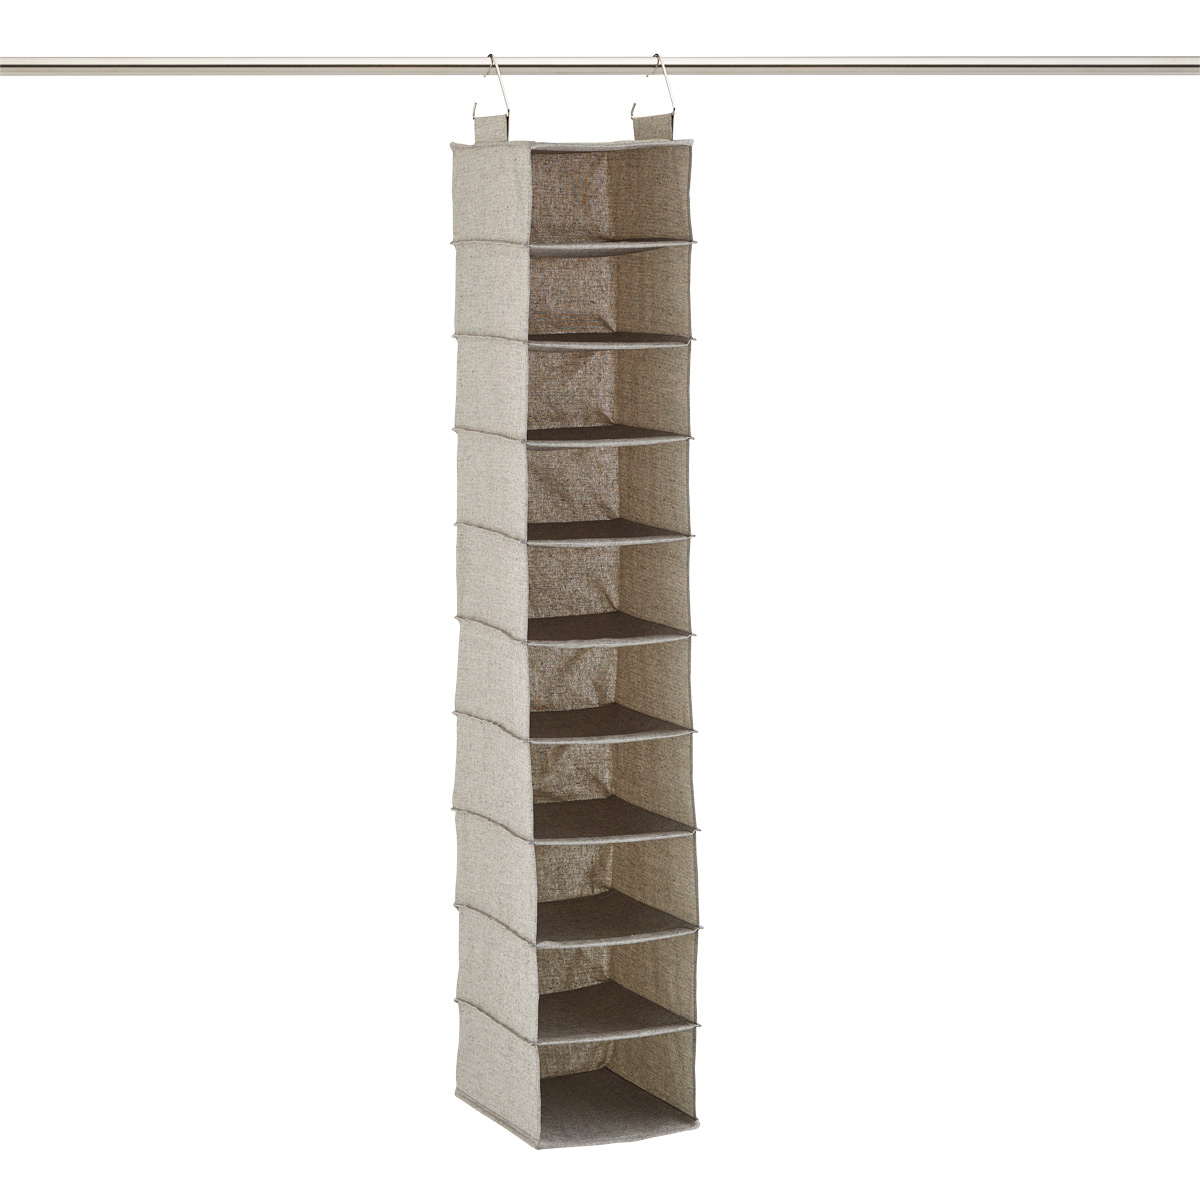 https://www.containerstore.com/catalogimages/420180/10085772-wide-10-compartment-hanging.jpg